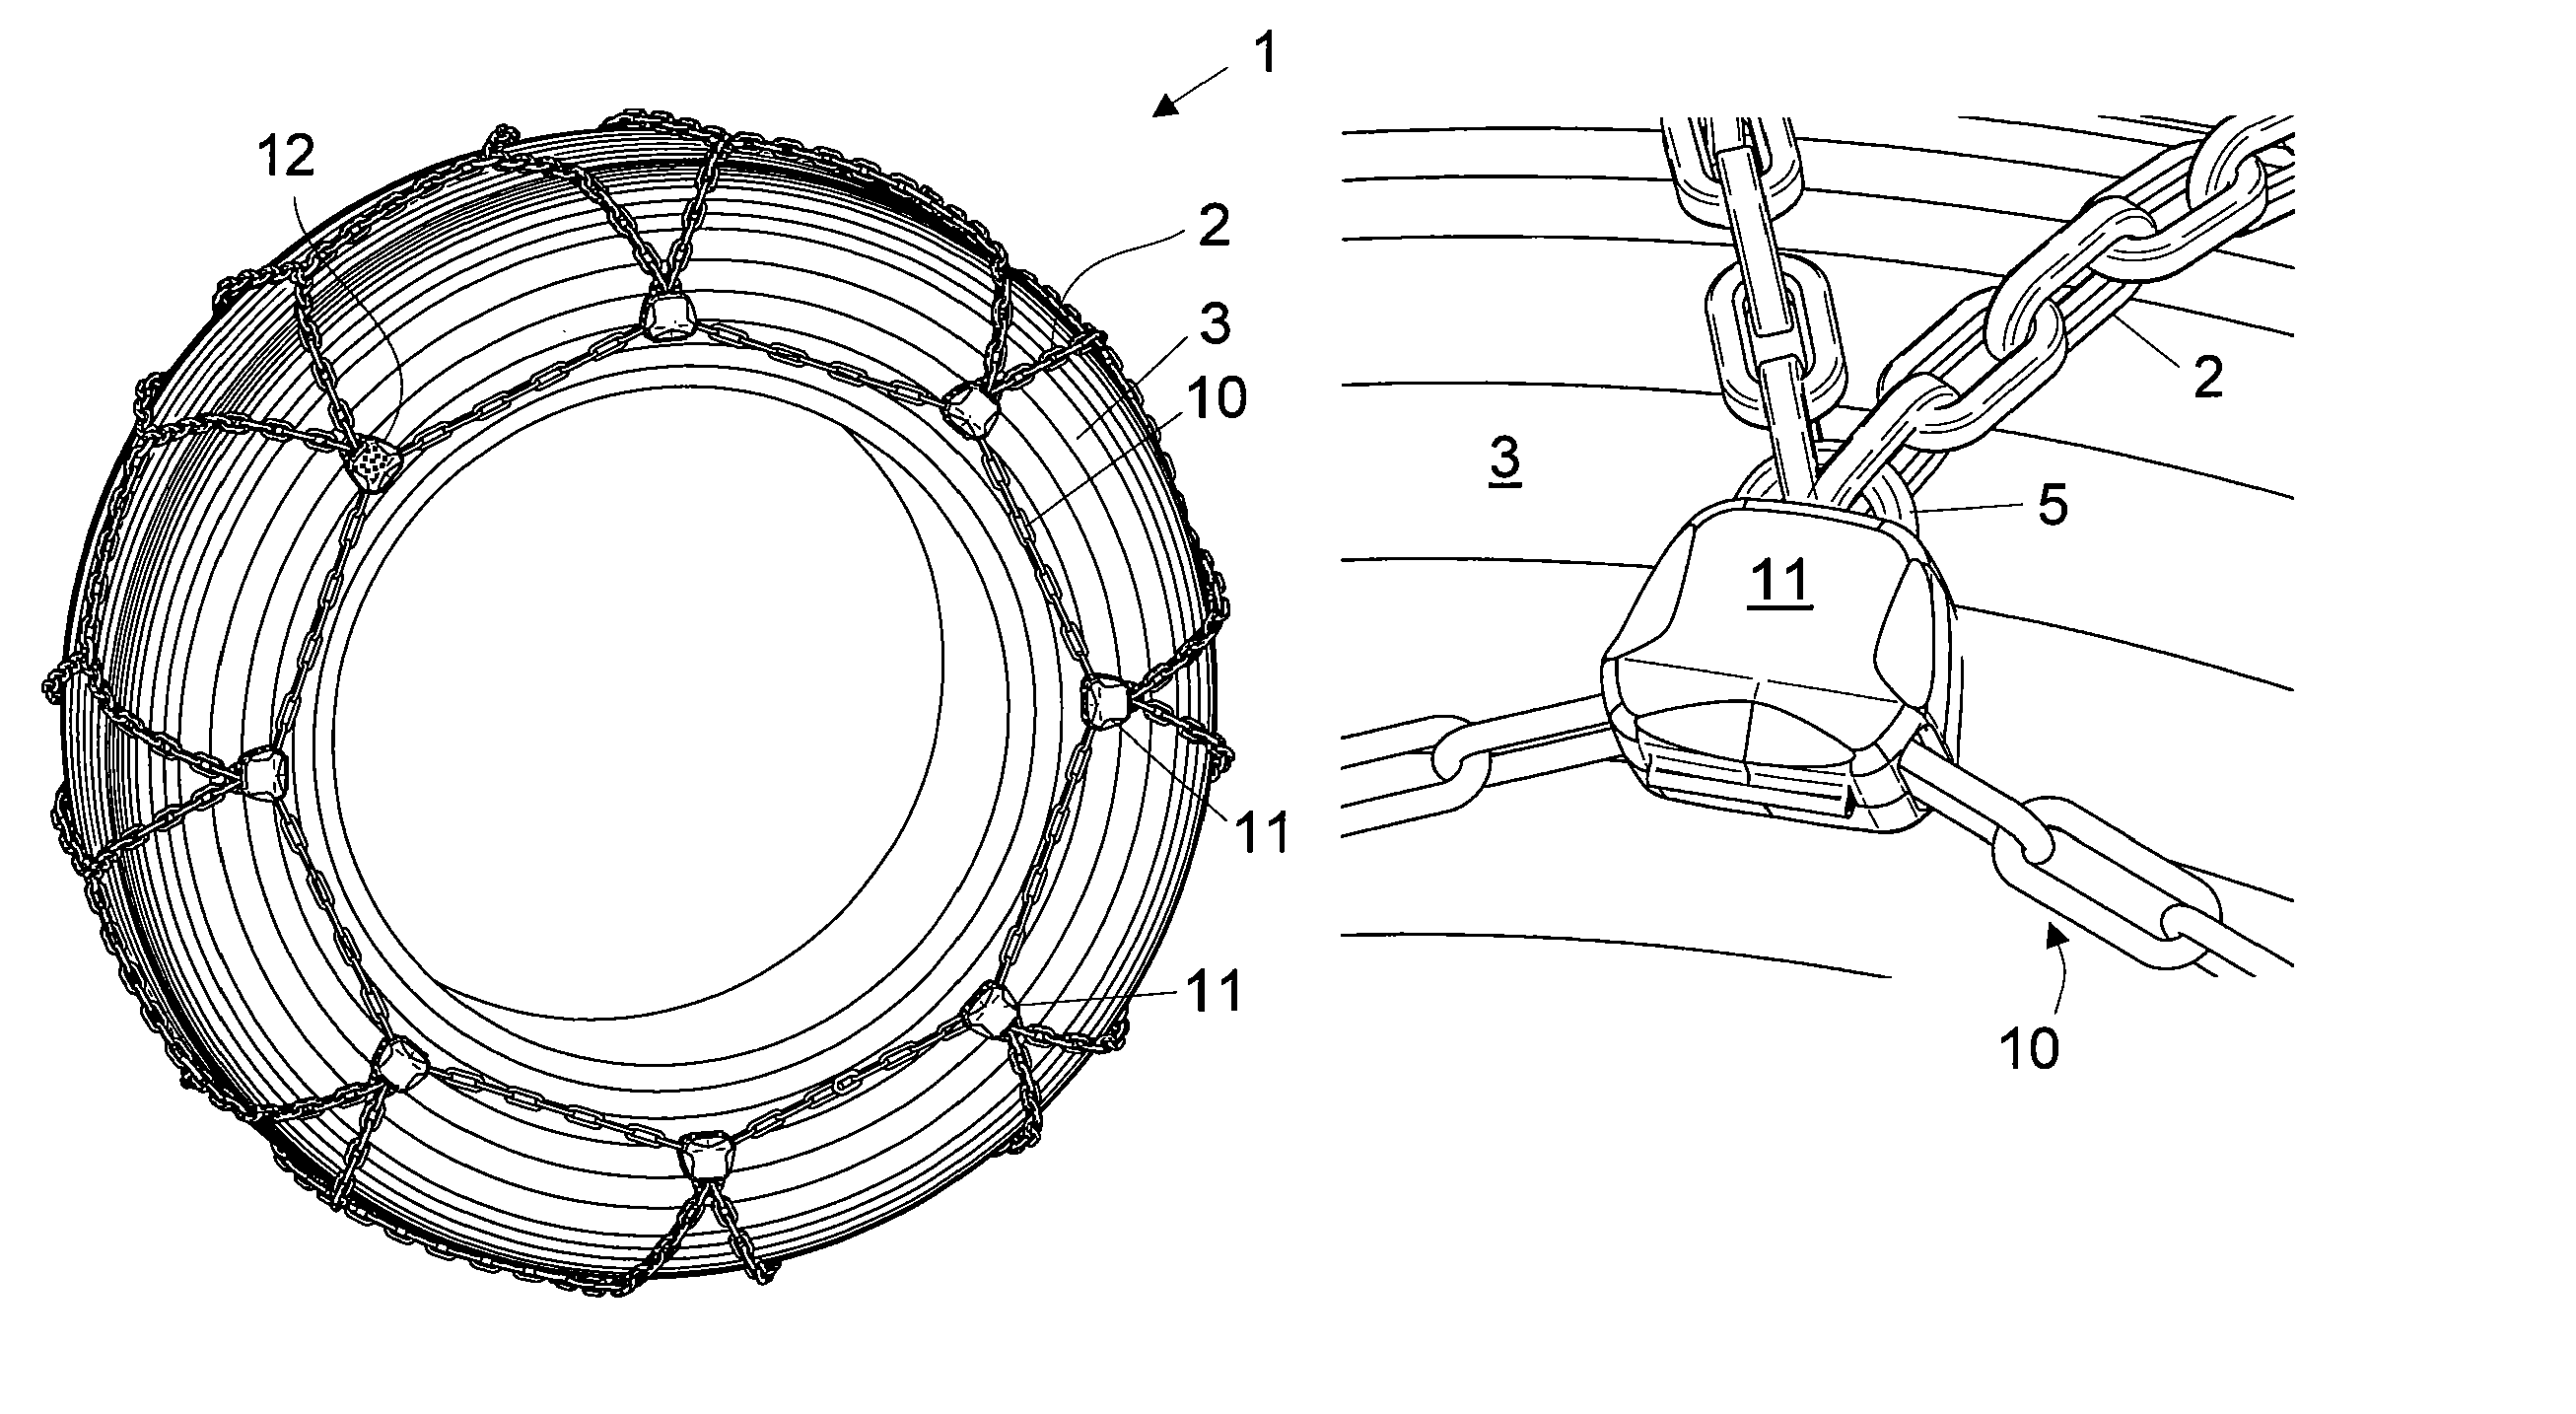 Anti-skid chain with rim protection covering